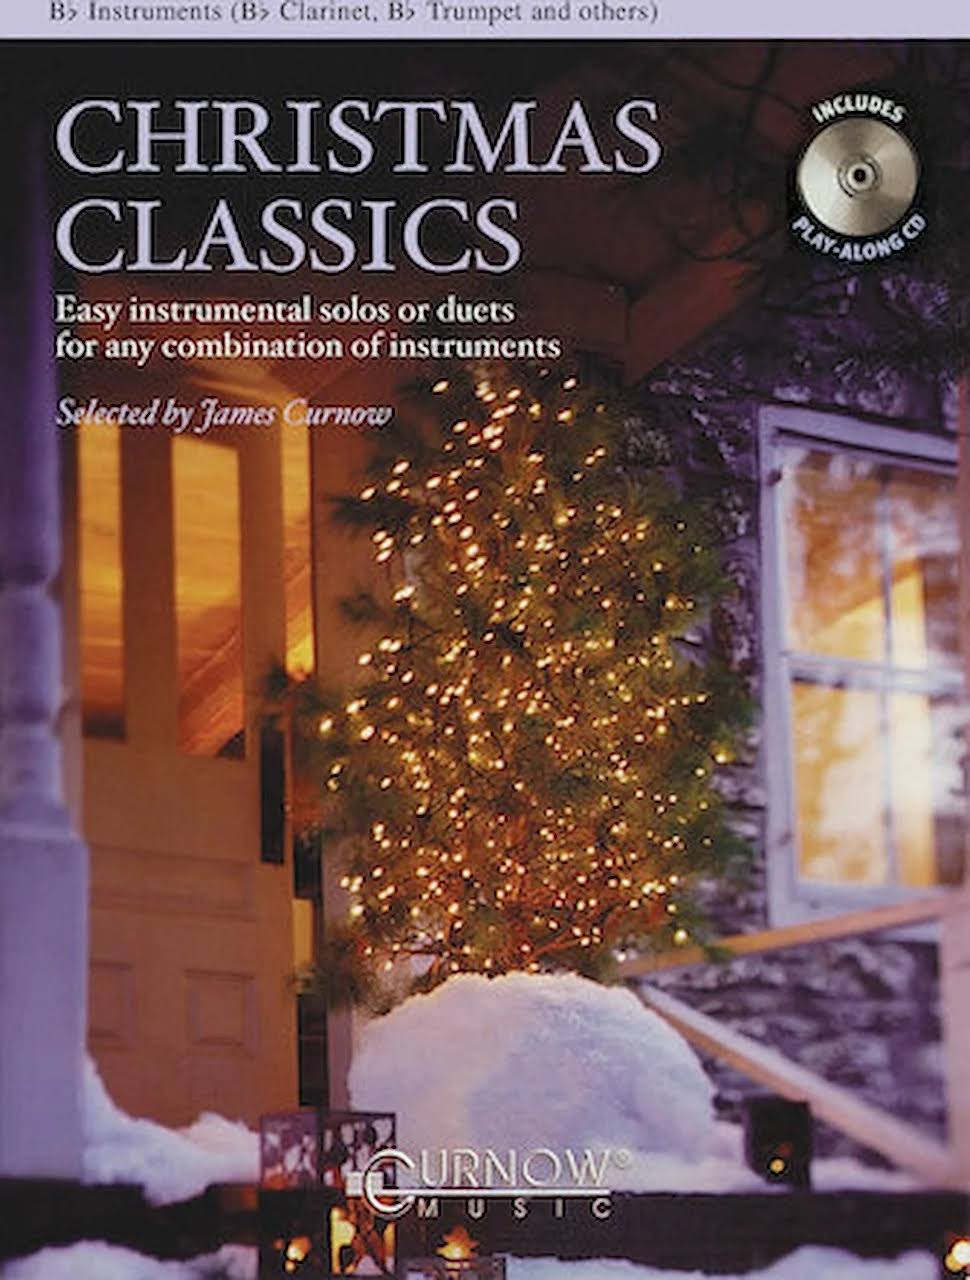 Christmas Classics - Easy Instrumental Solos or Duets for Any Combination of Instruments - Sheet Music